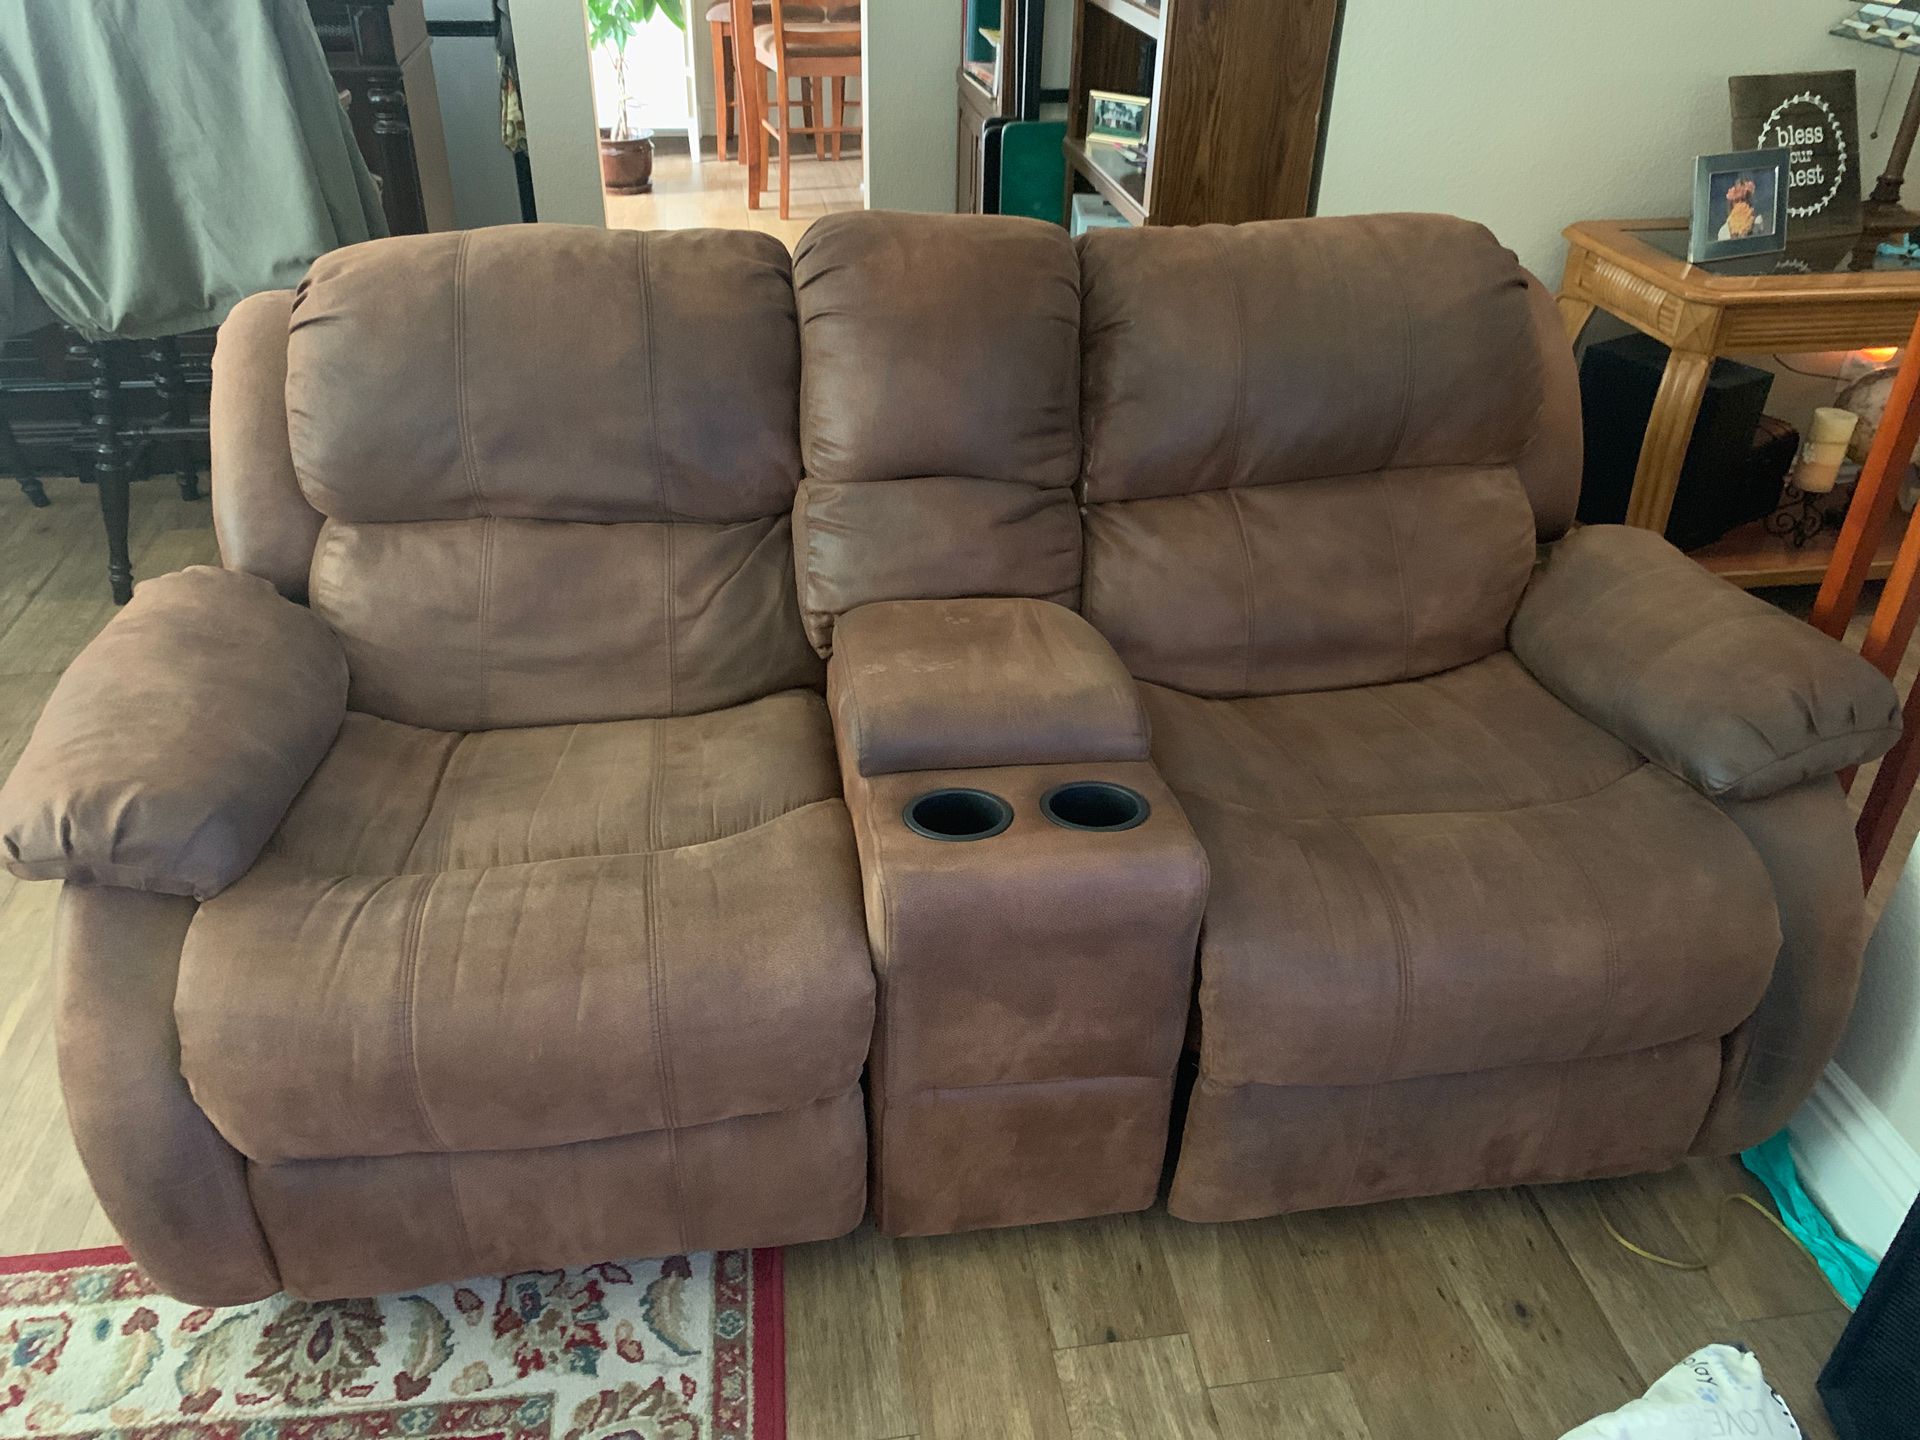 Double rocker recliner, center consul with two cupholders.